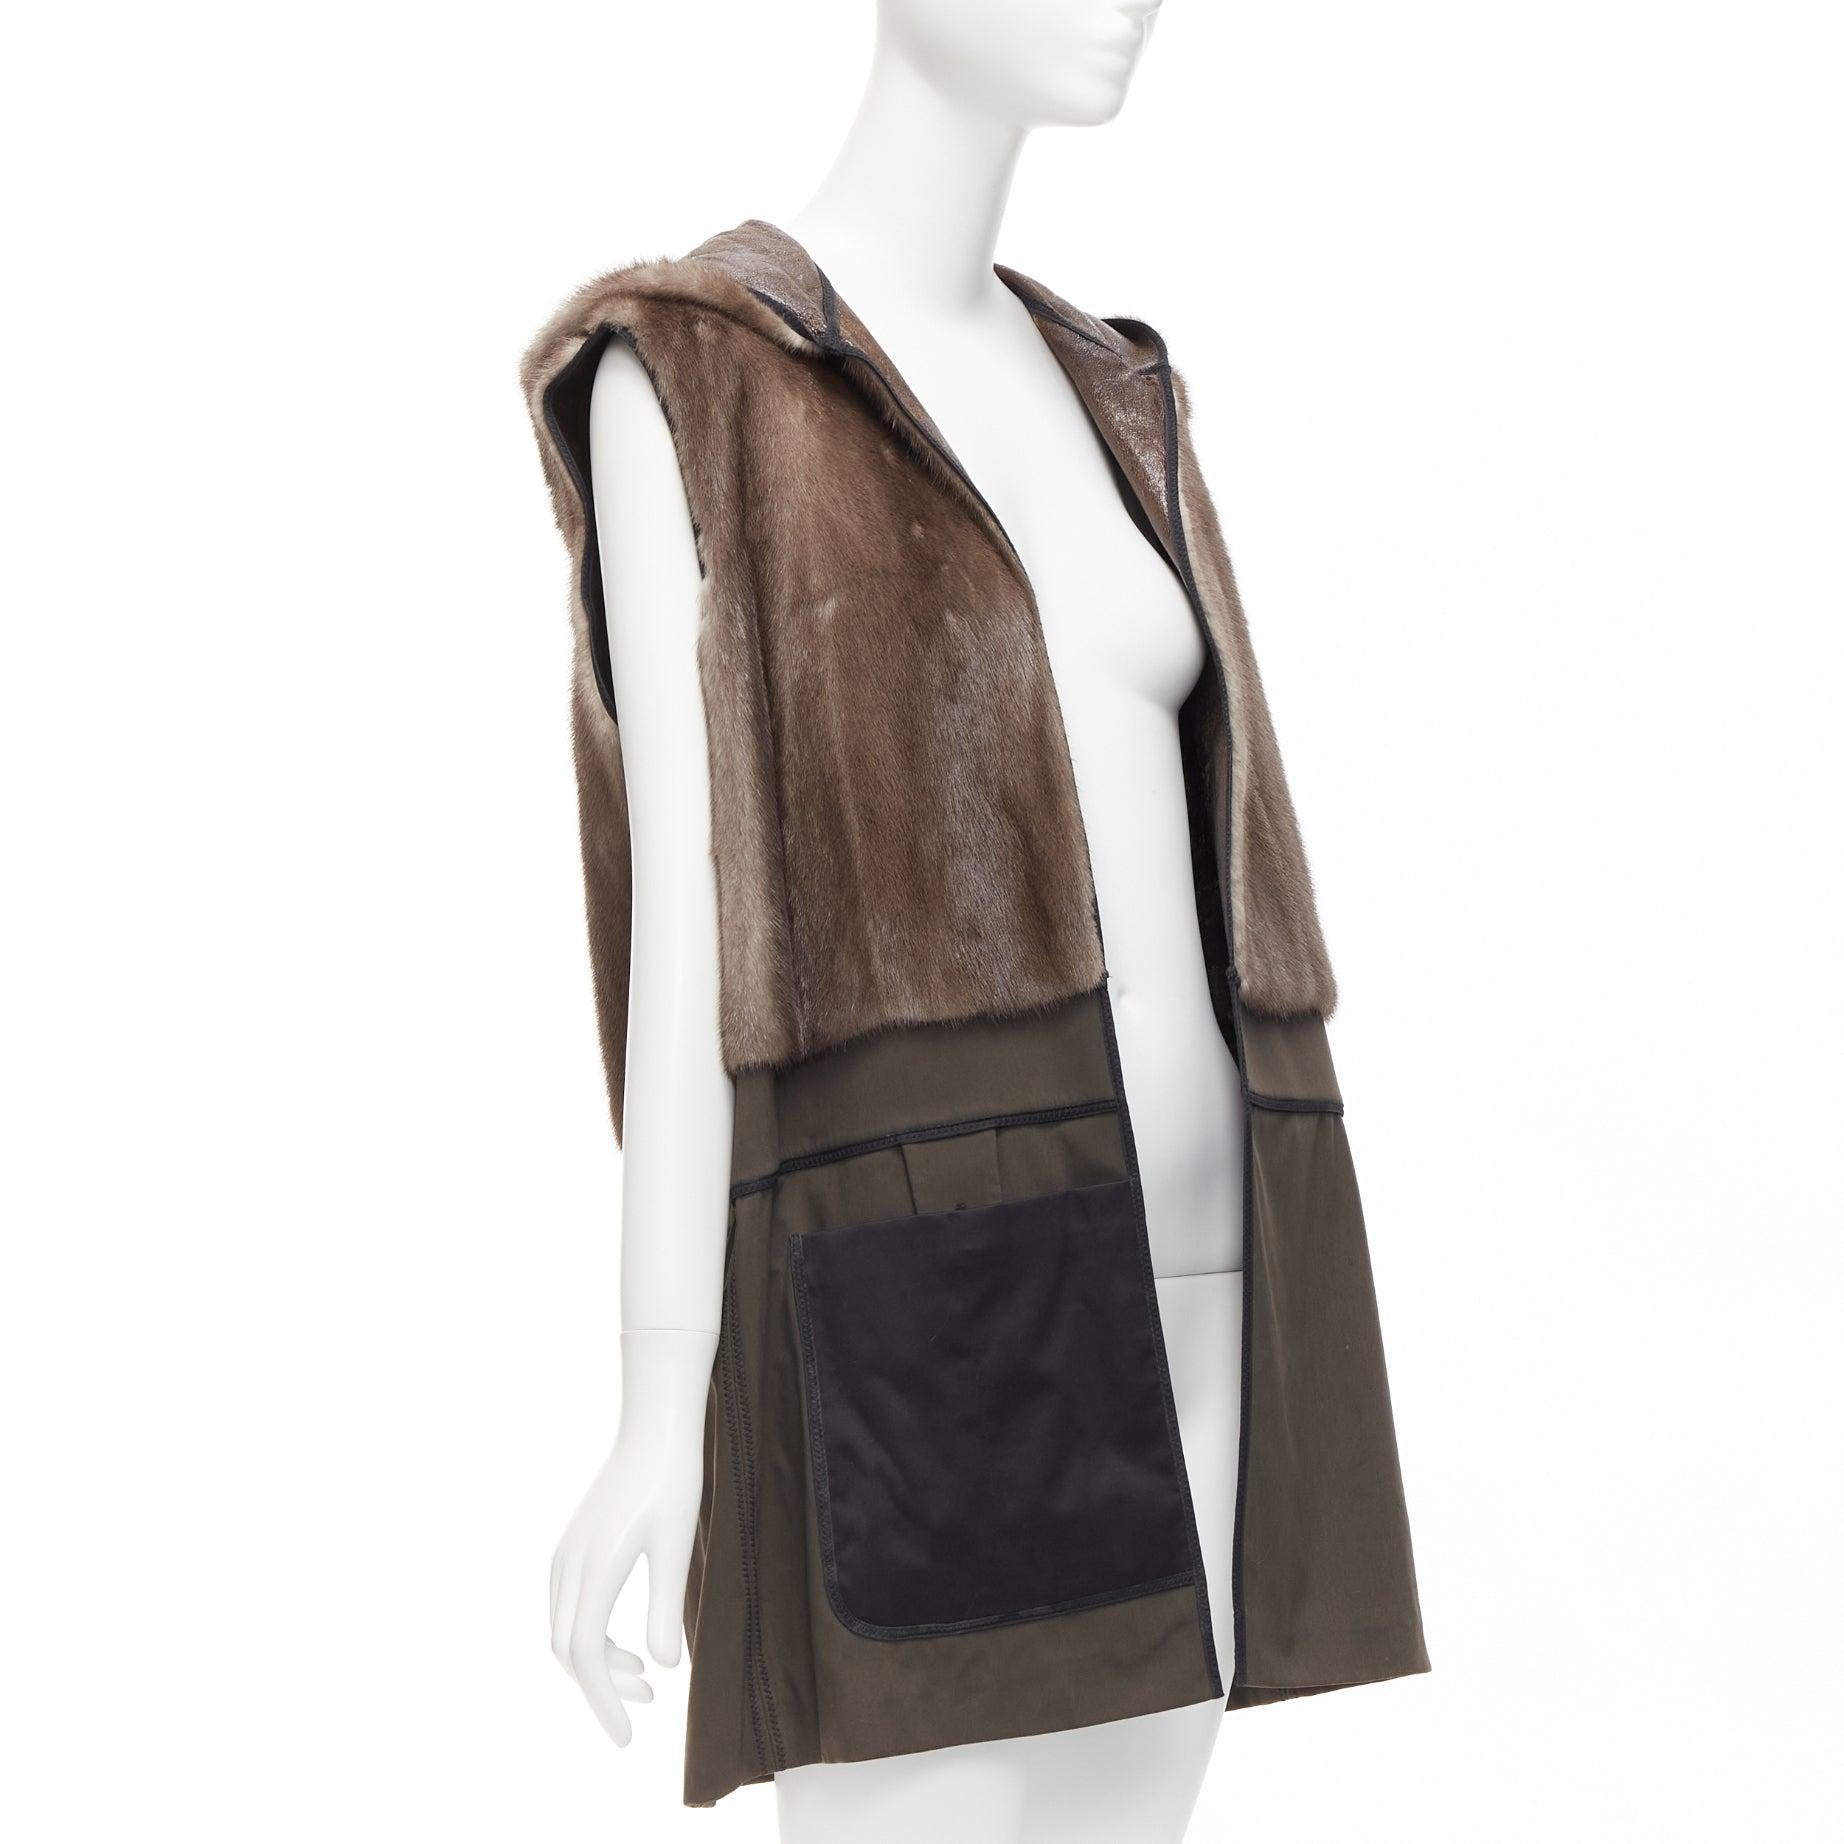 MARNI Mink Gilet Reversible brown colorblocked textured fur hooded vest IT40 S
Reference: DYTG/A00001
Brand: Marni
Model: Mink Gilet
Material: Fur, Leather, Fabric
Color: Brown, Khaki
Pattern: Solid
Lining: Brown Fur
Extra Details: Reversible.
Made